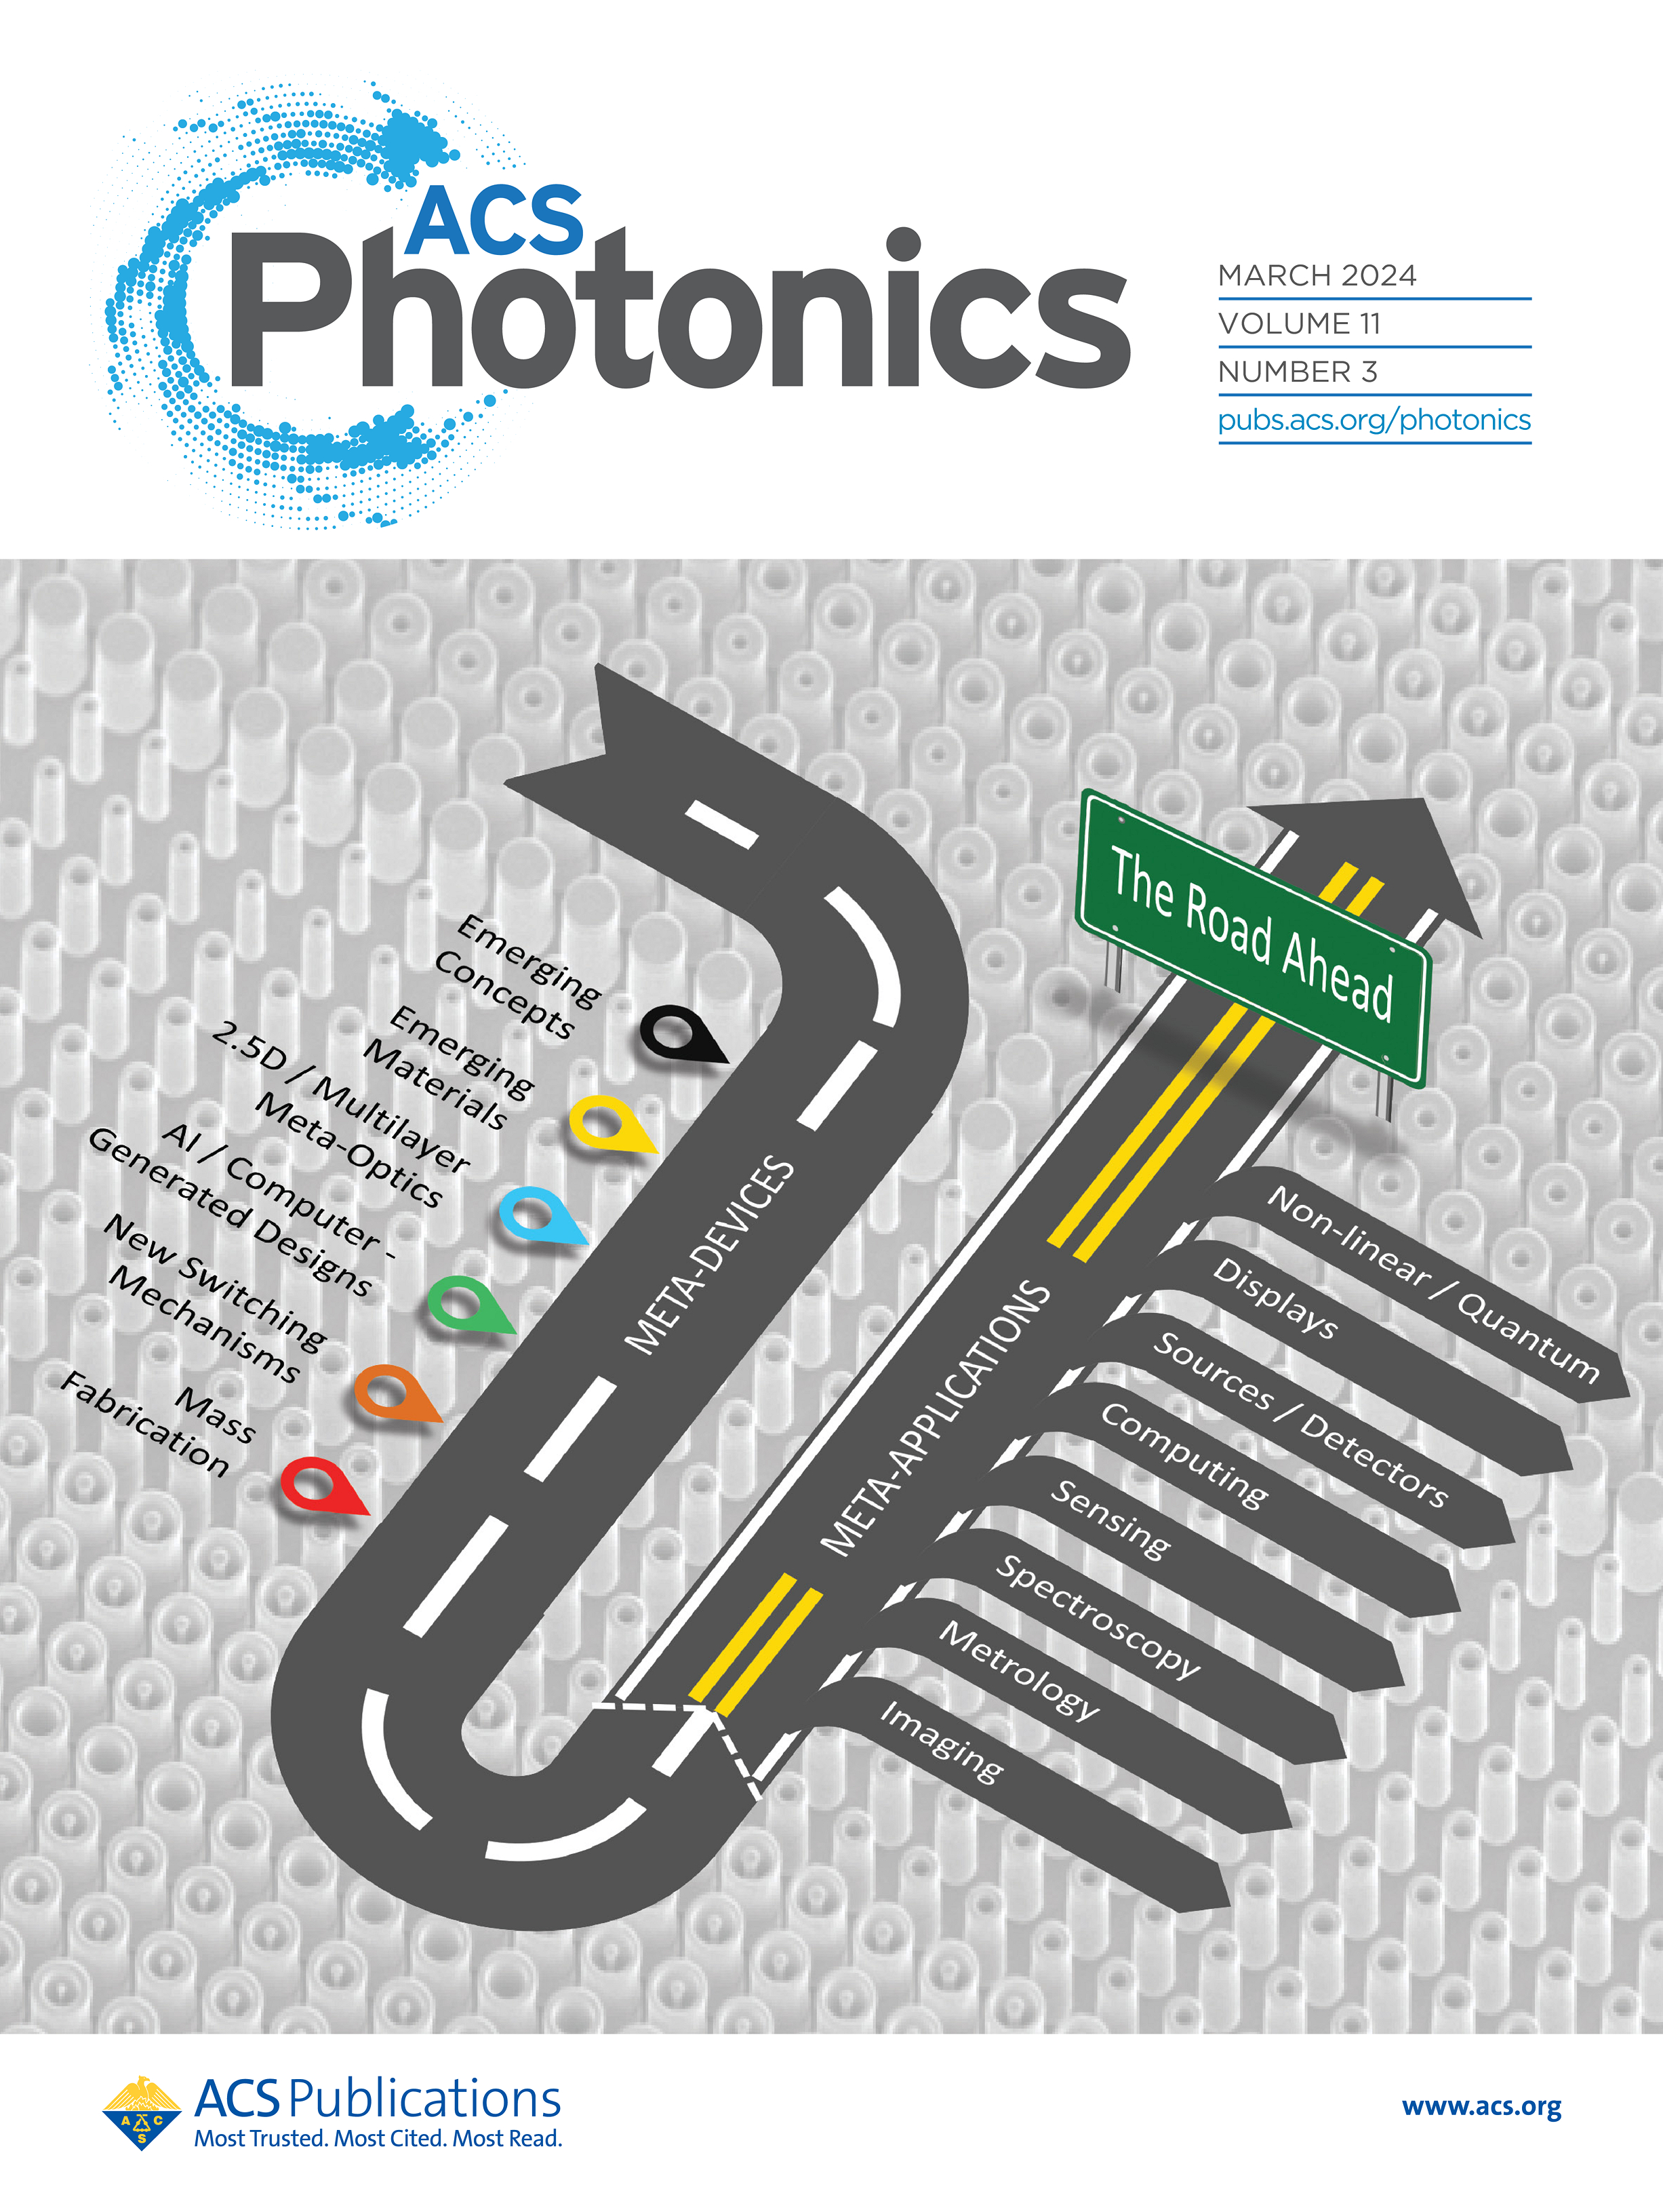 Roadmap for Optical Metasurfaces on the Cover of ACS Photonics